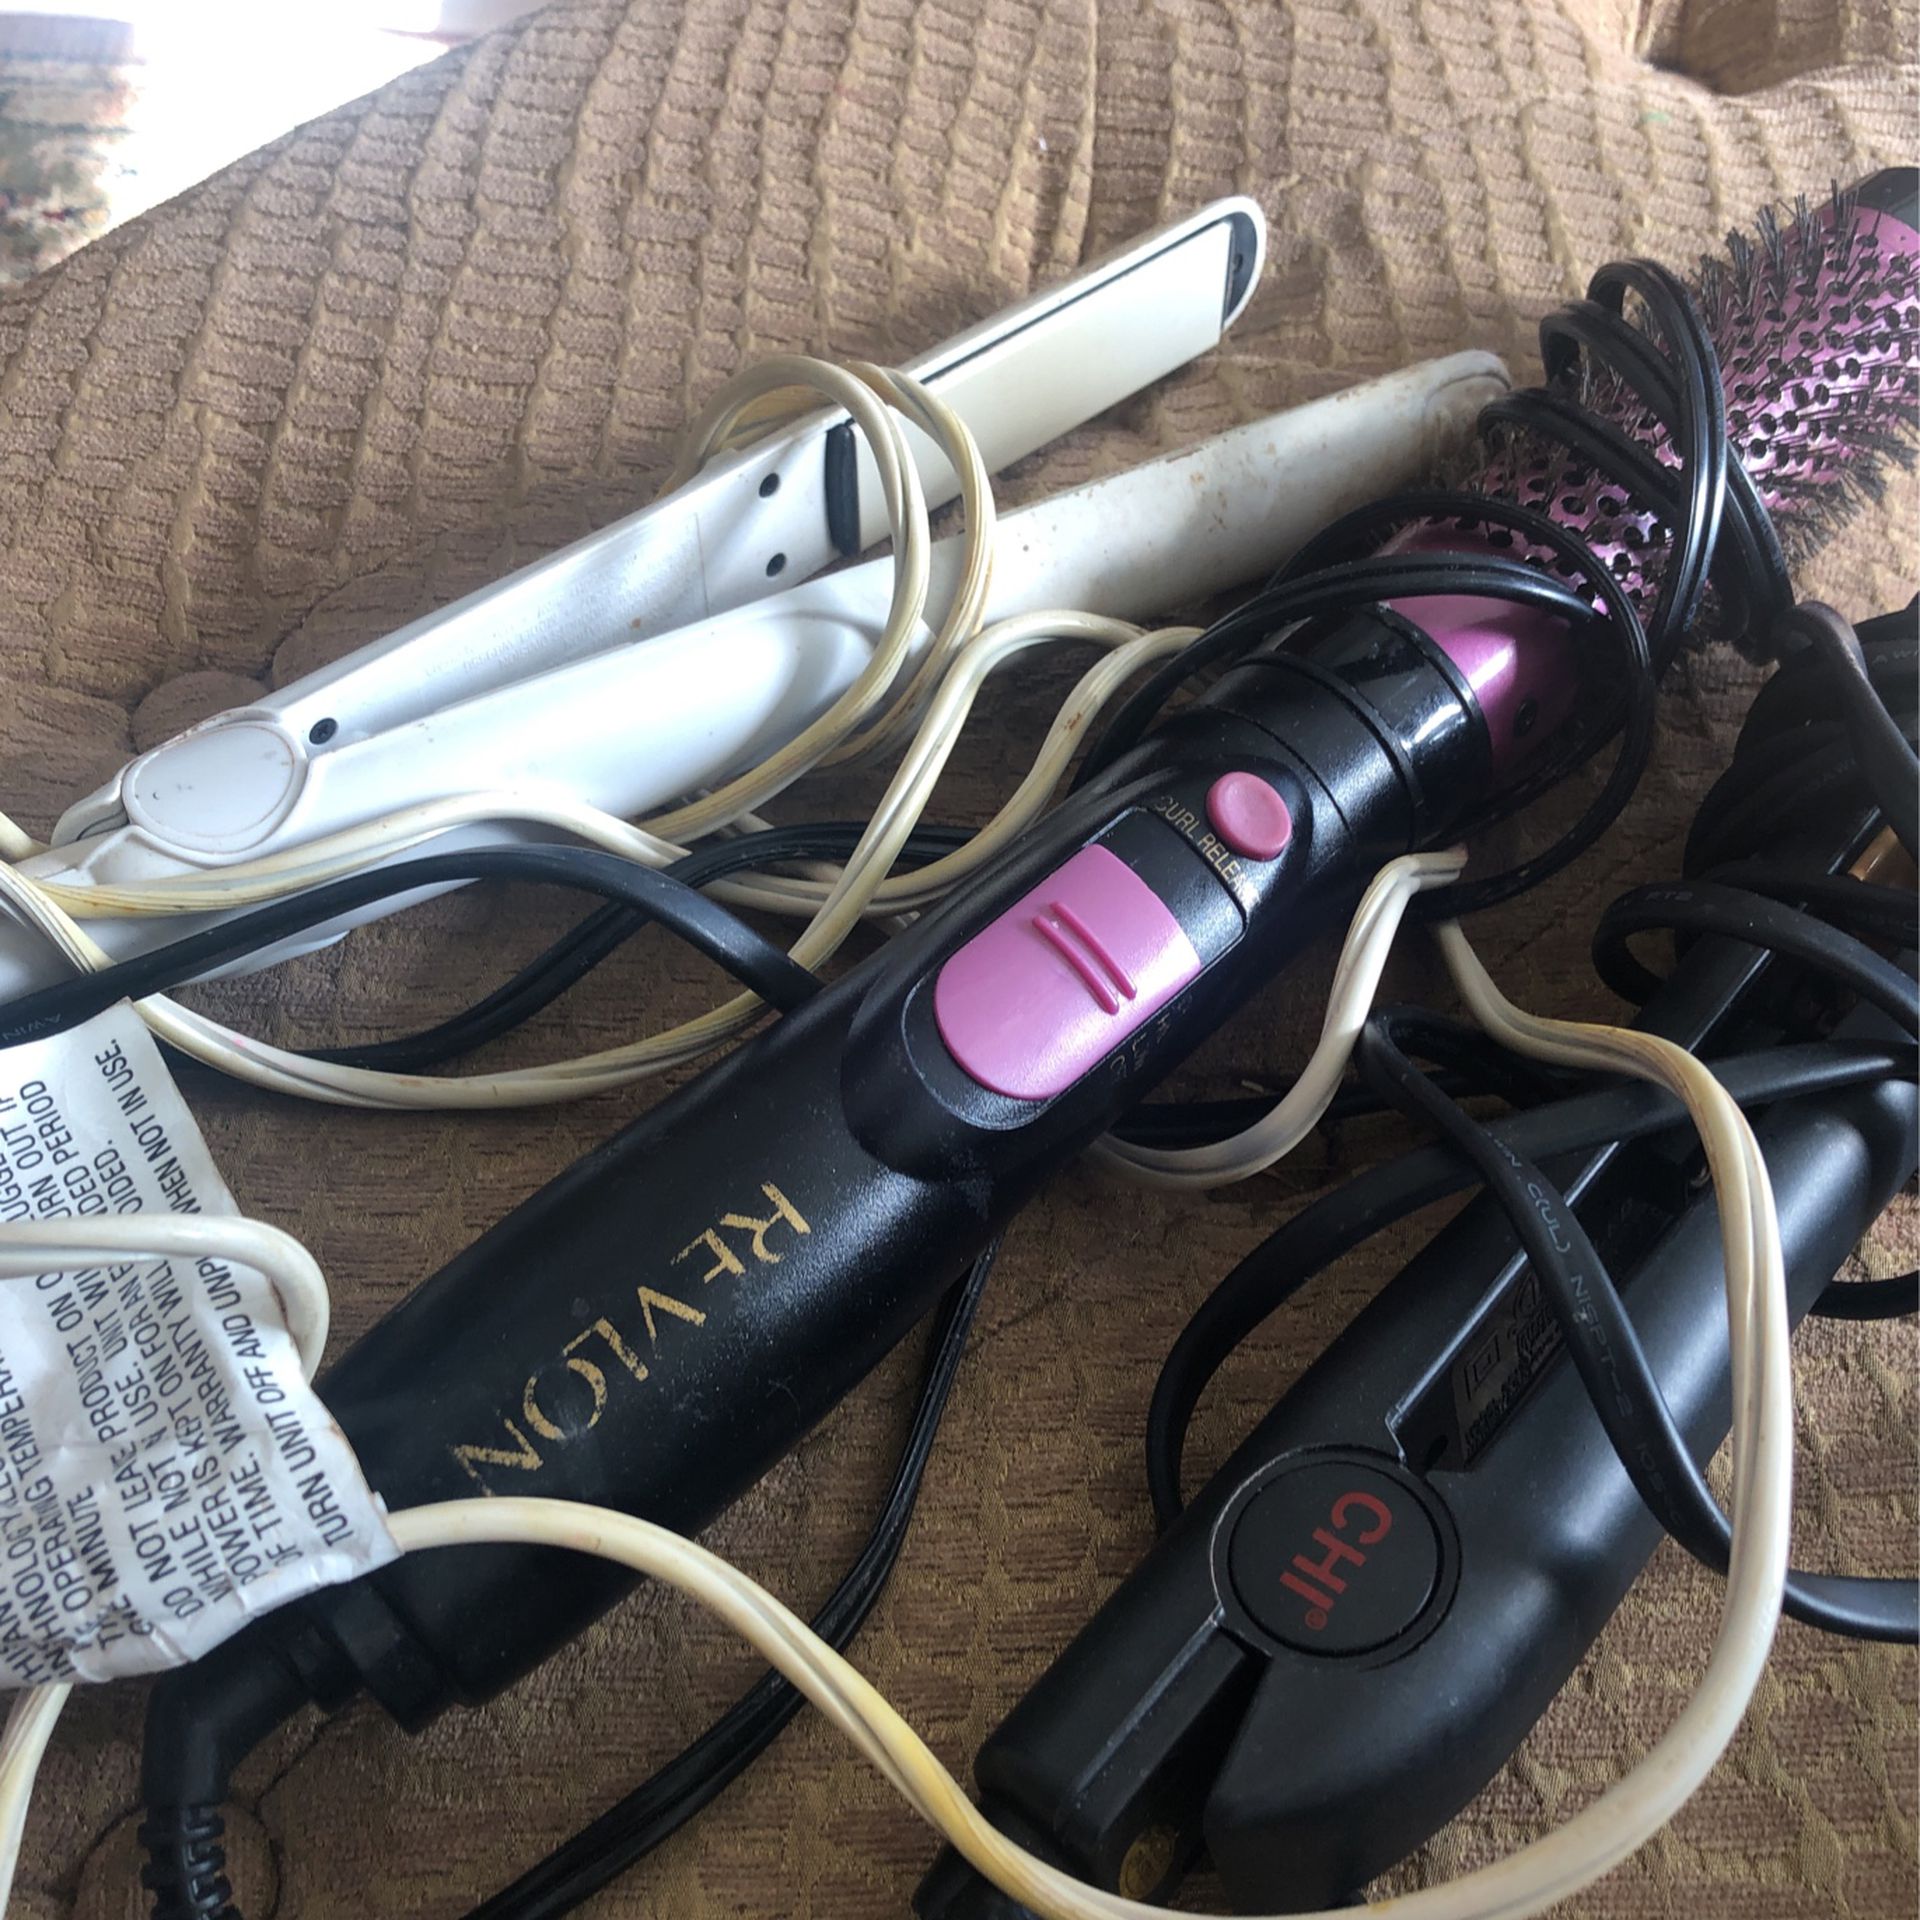 Hair Styling Tools 2 Flat Iron (chi) And A Blower Brush 